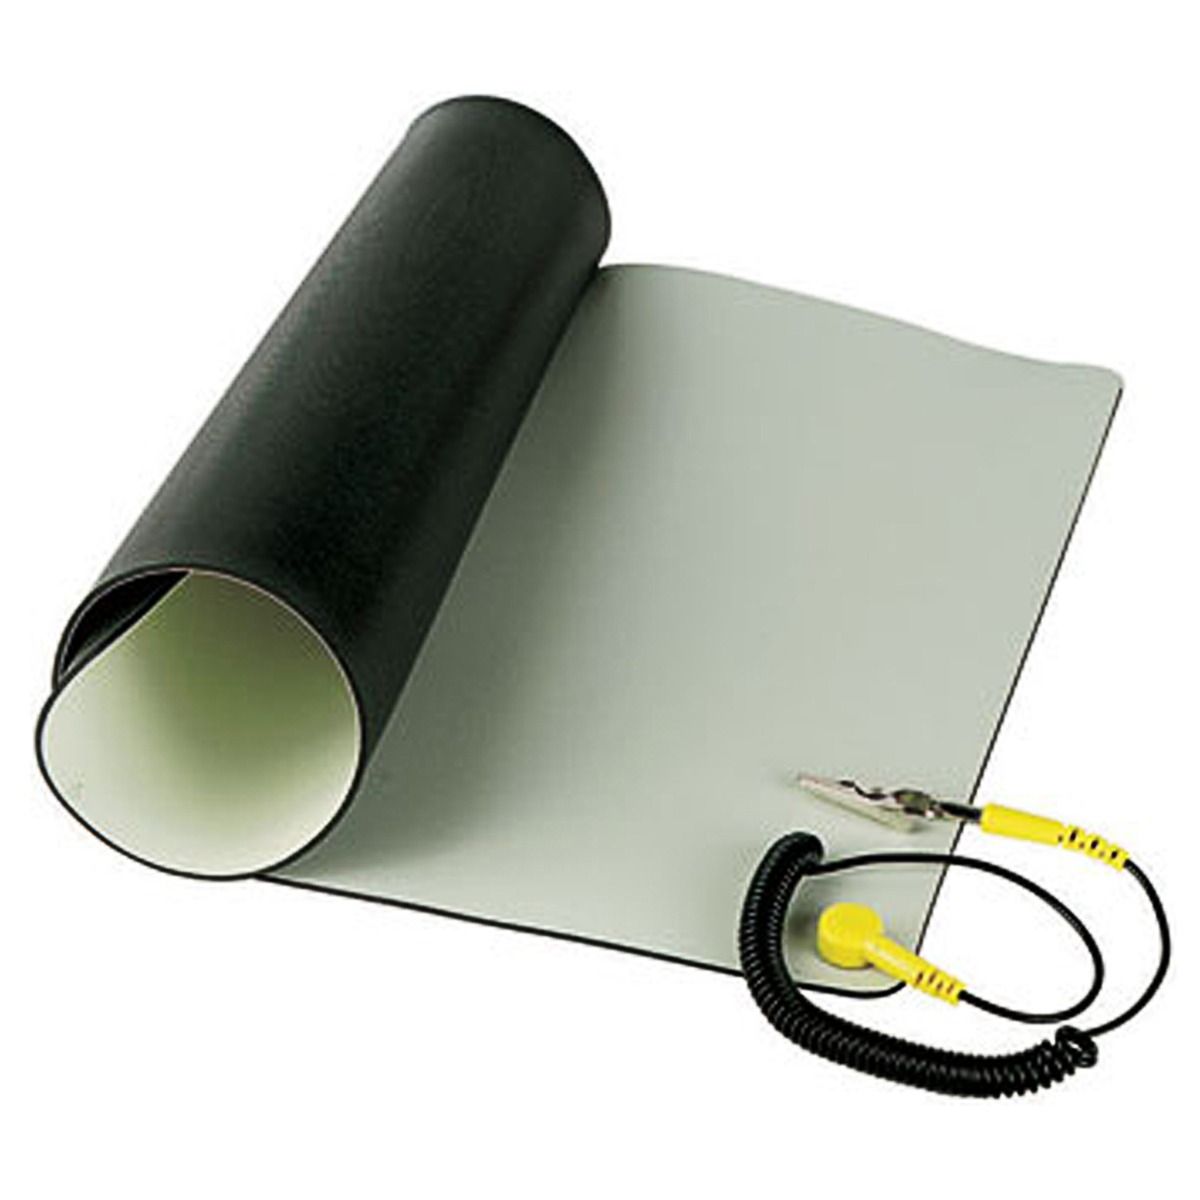 Anti-Static ESD Rework Mat with Grounding Clip - A4 Size